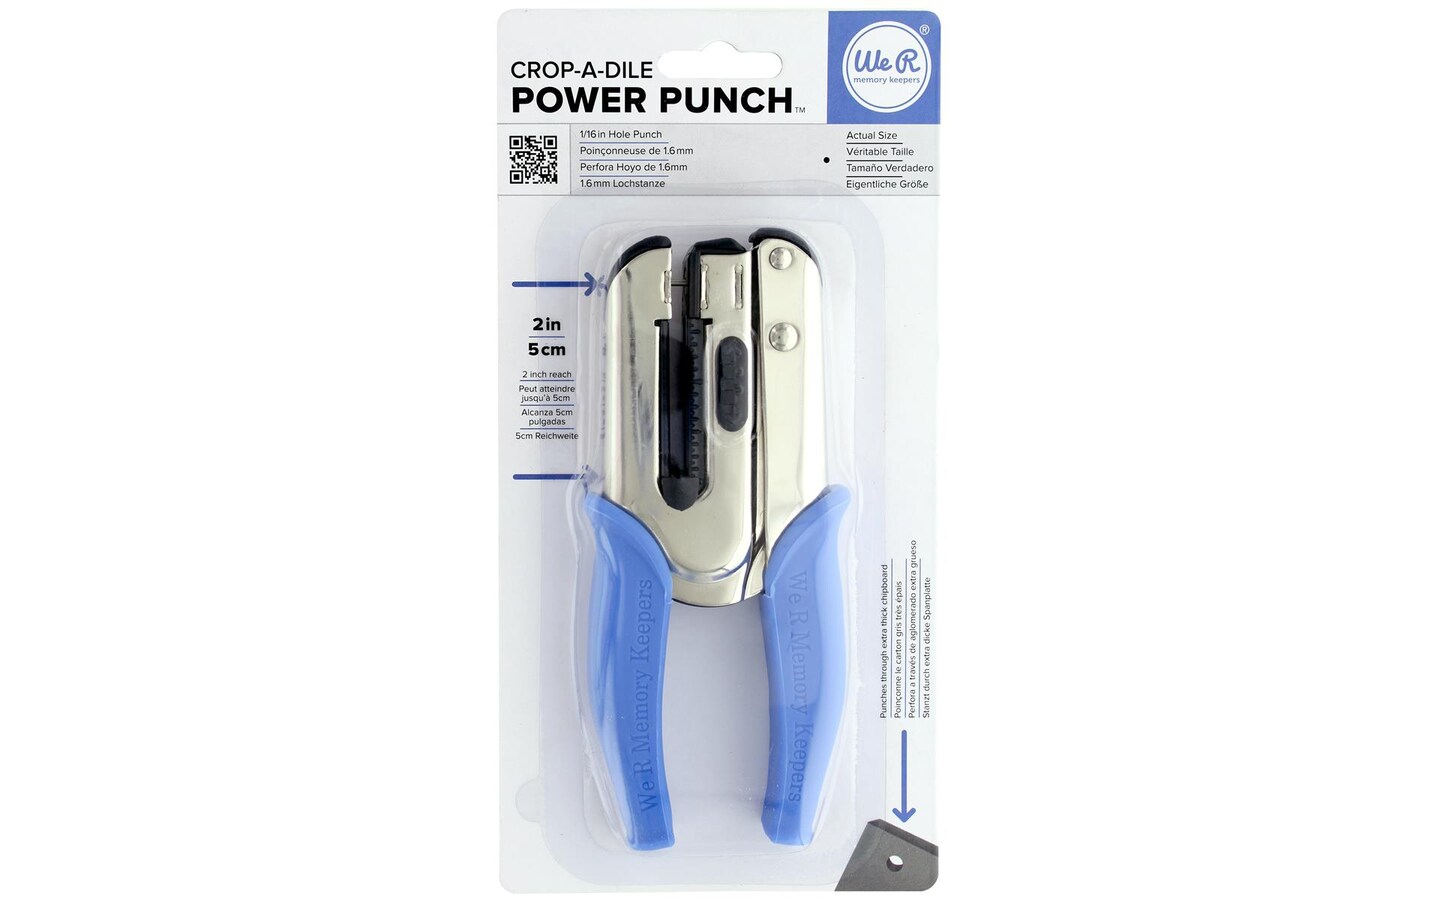 Crop-A-Dile Power Punch